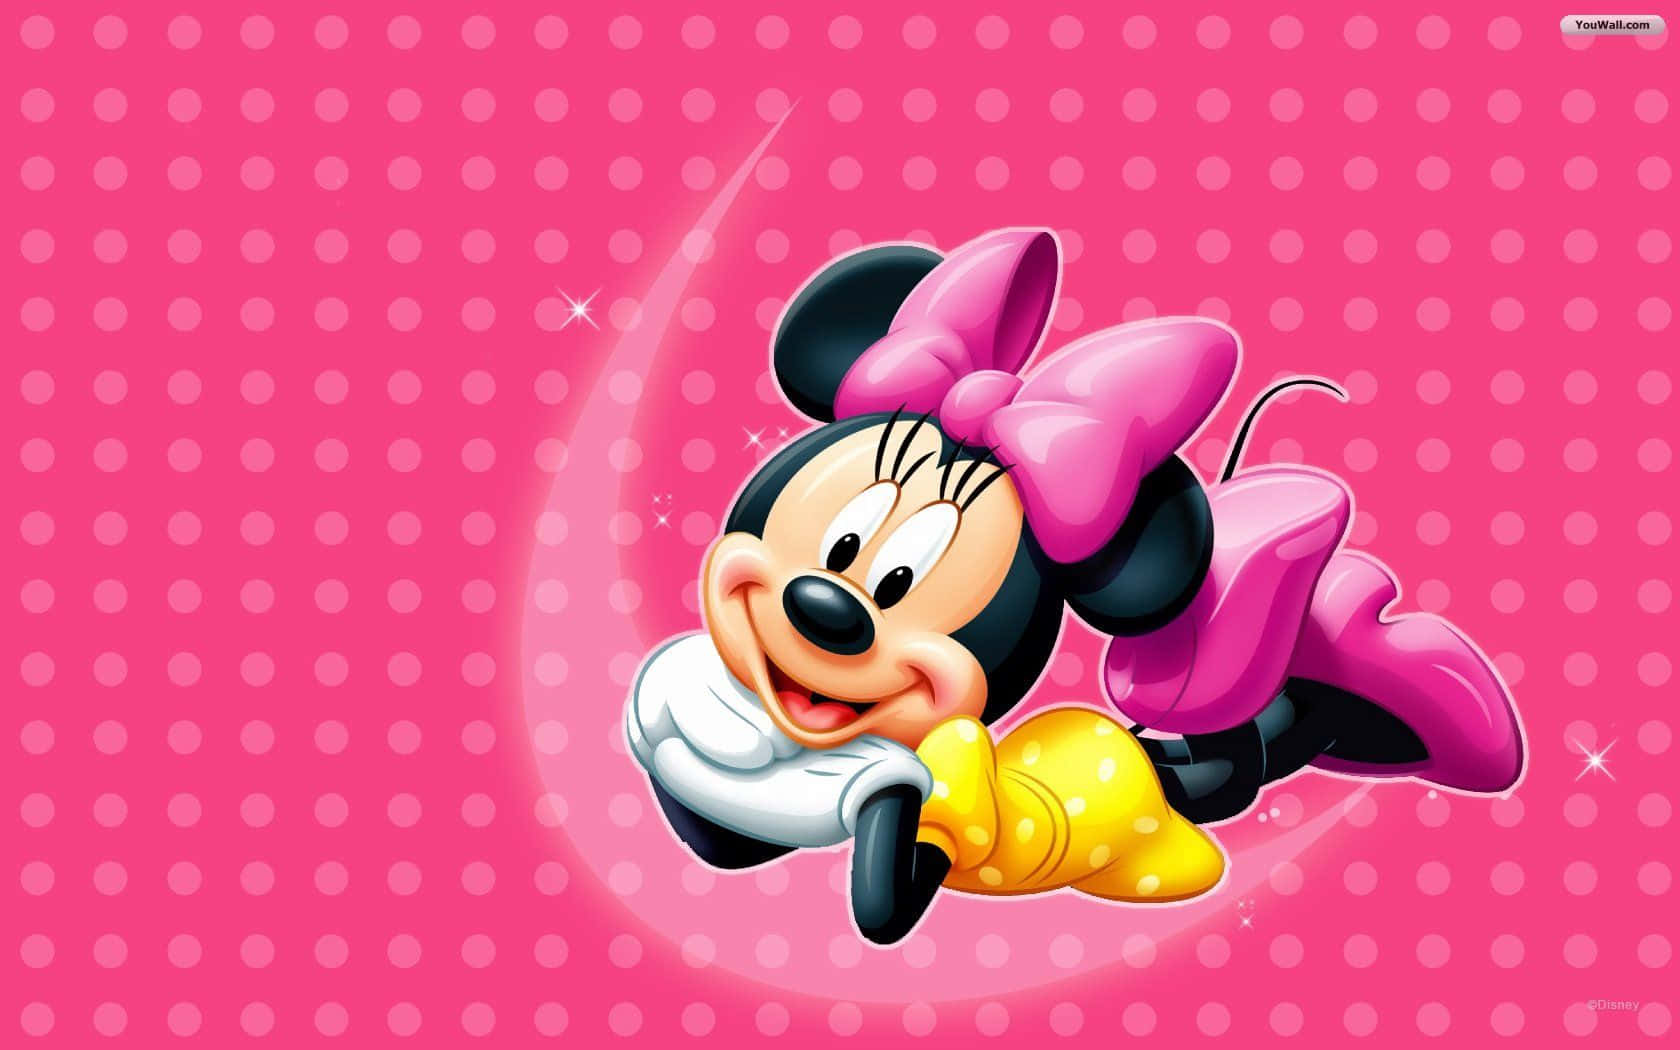 Minnie Mouse Spreads Magic in Pink Wallpaper